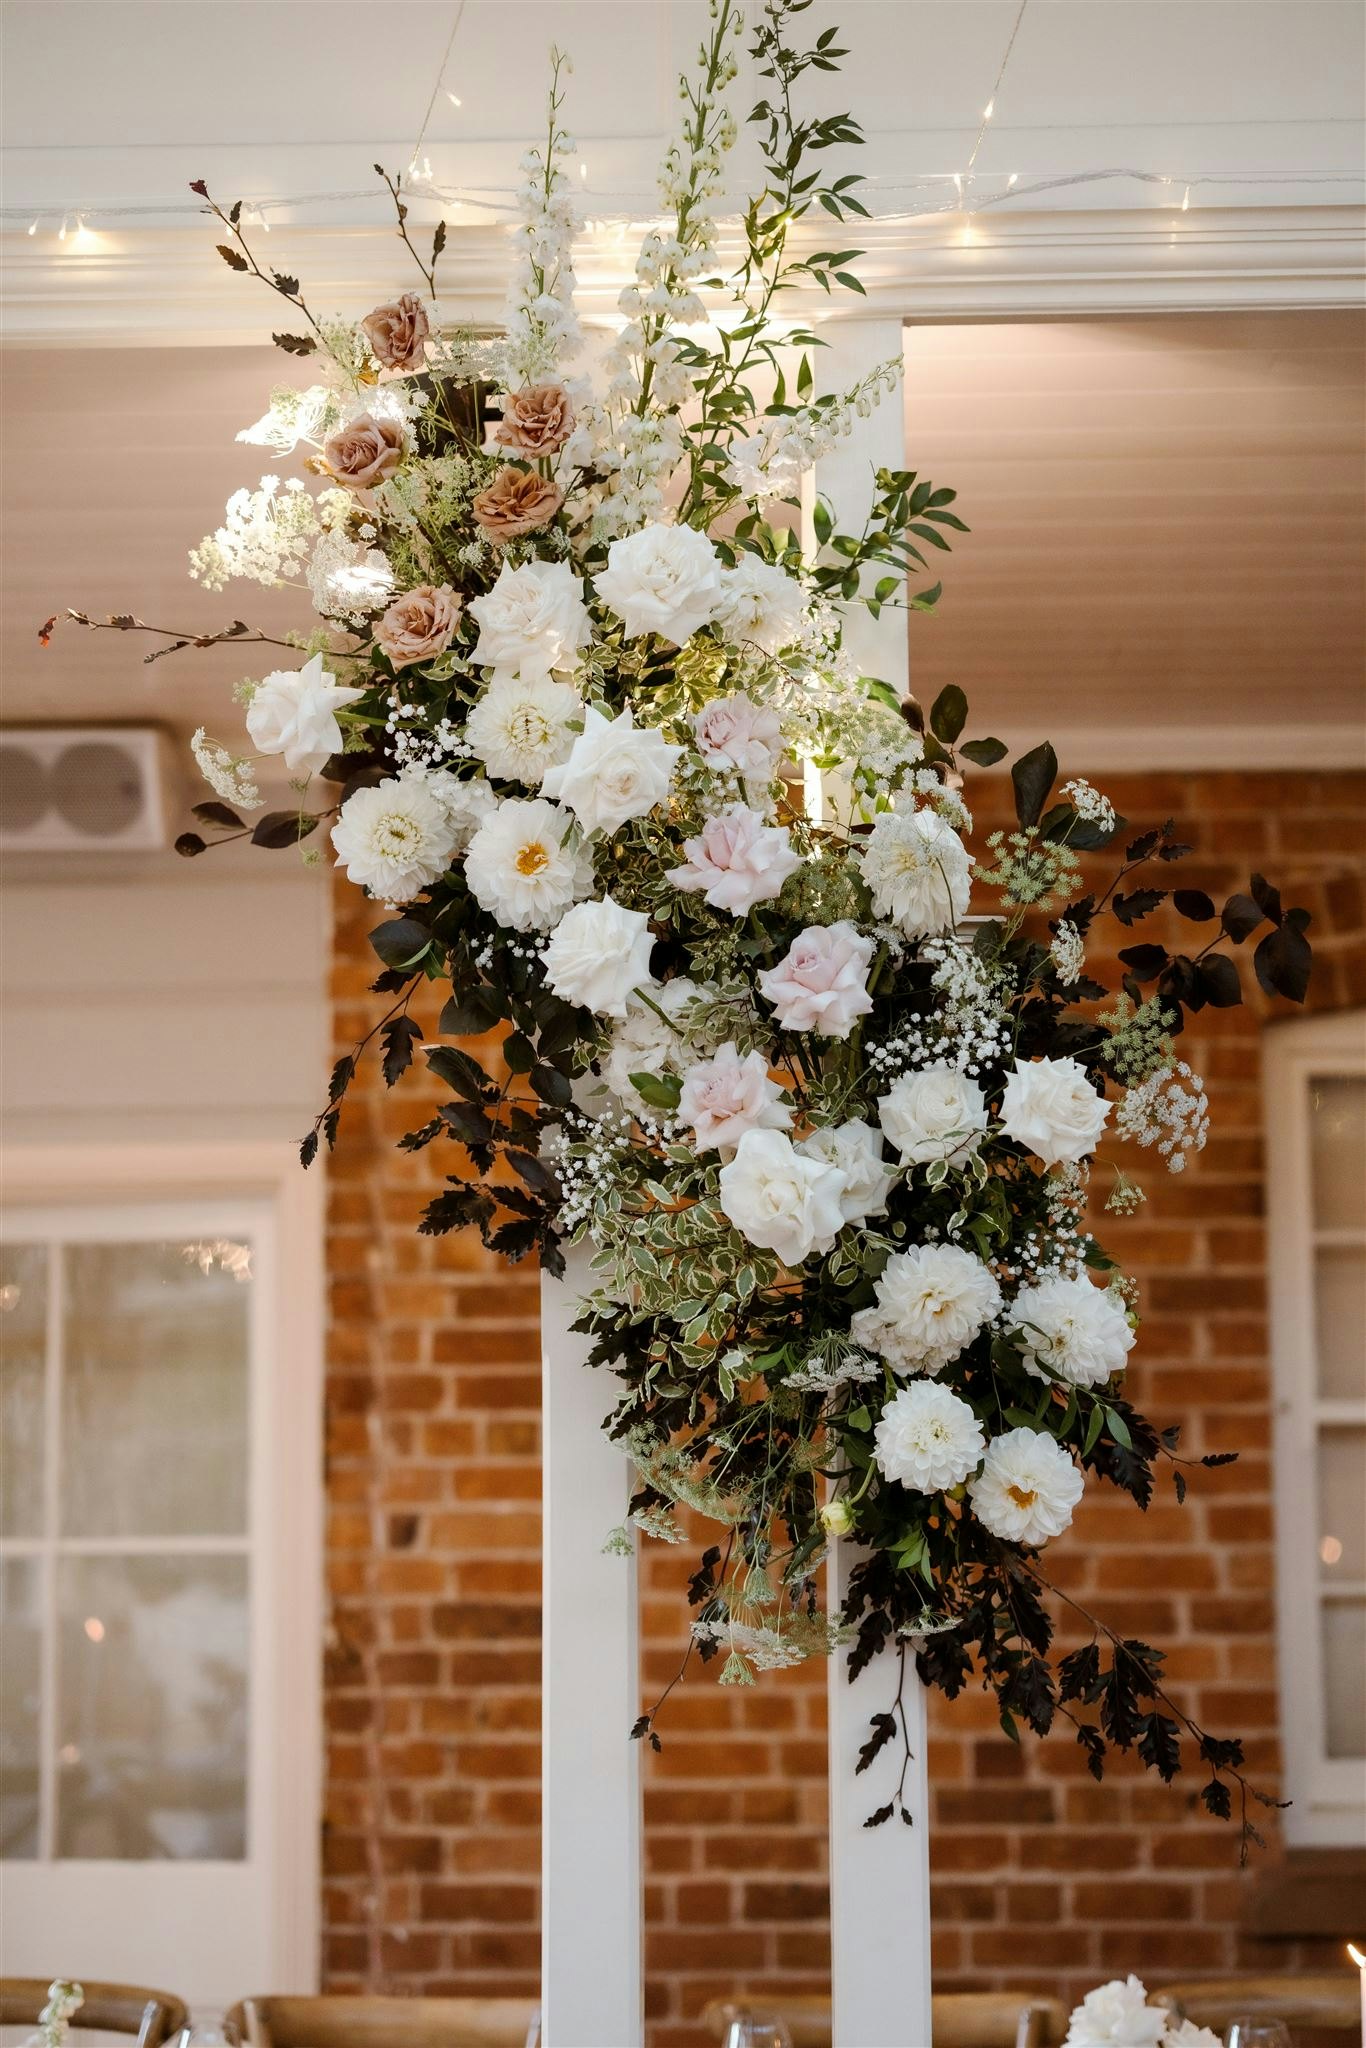 Flowers mounted on a pole